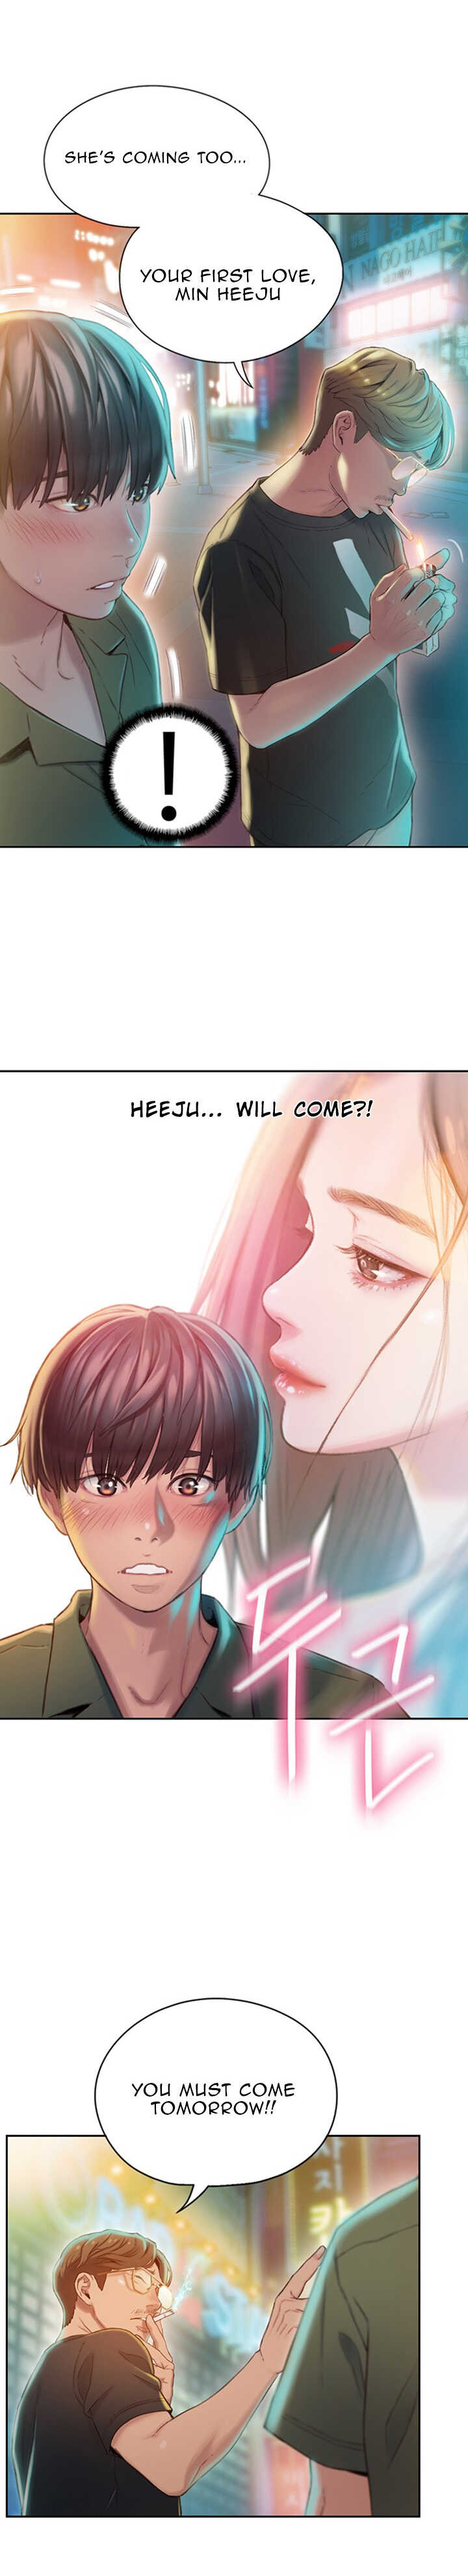 [Park Hyeongjun] Love Limit Exceeded (01-20) Ongoing - Page 29